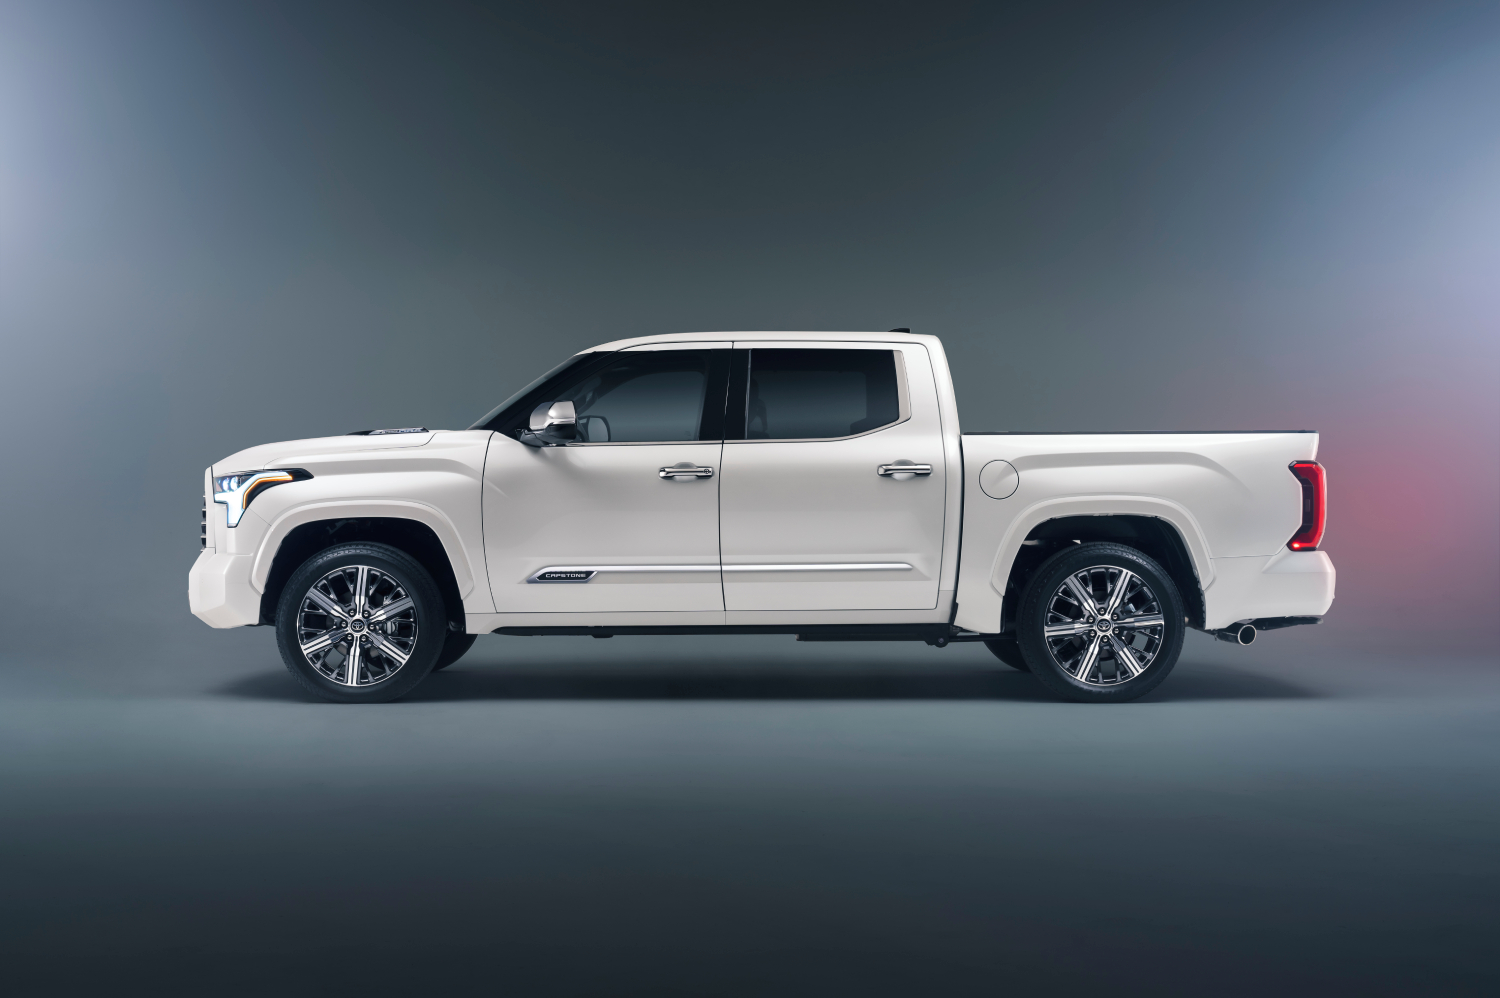 The Toyota Tundra Capstone like this one is a new luxury truck